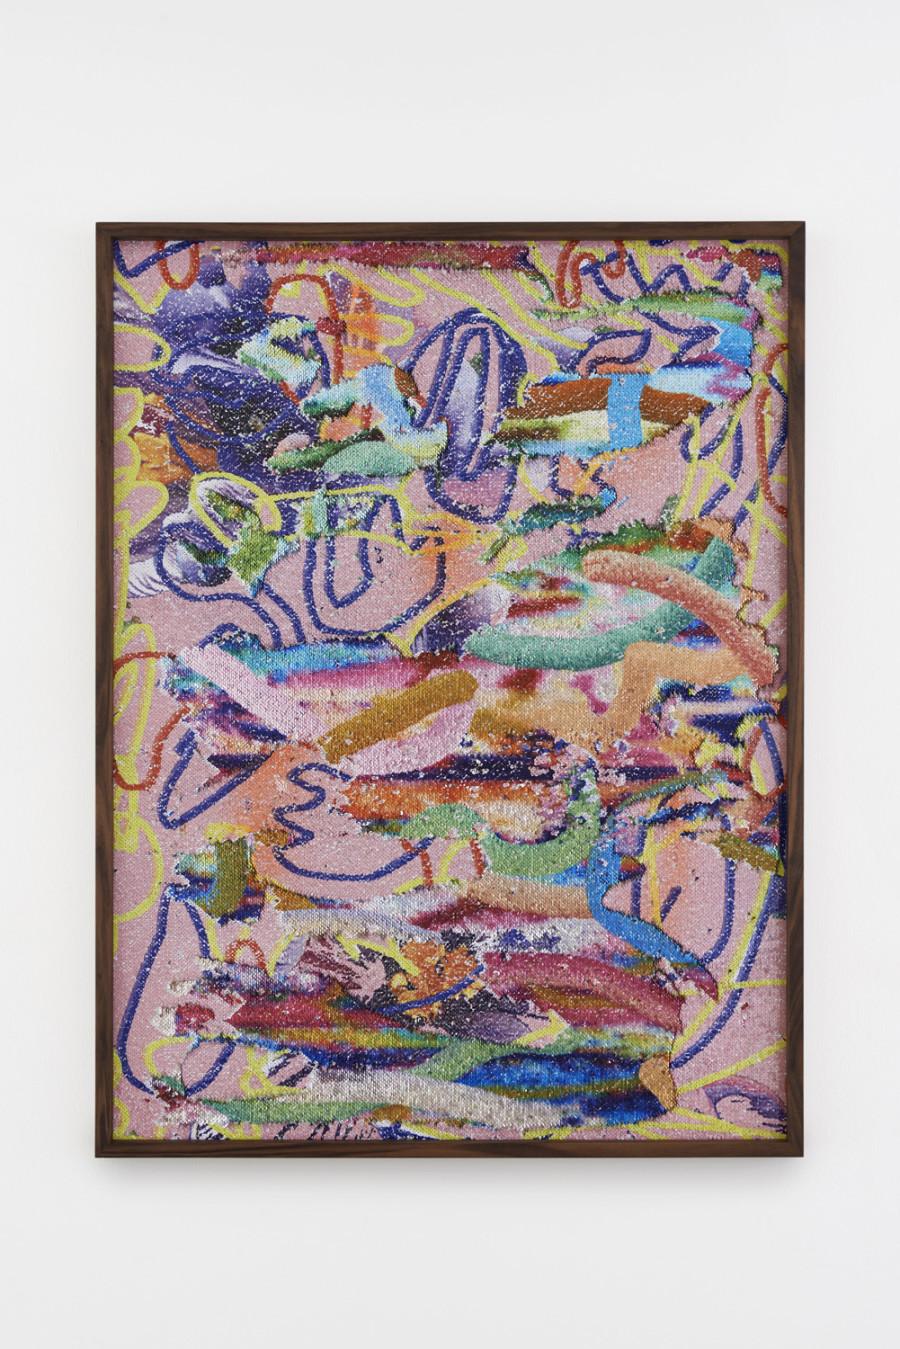 Olga Titus, Ohne Titel, 2022, Reversible sequins printed on both sides on non-woven linen, 122 x 92 cm, Edition of 7.